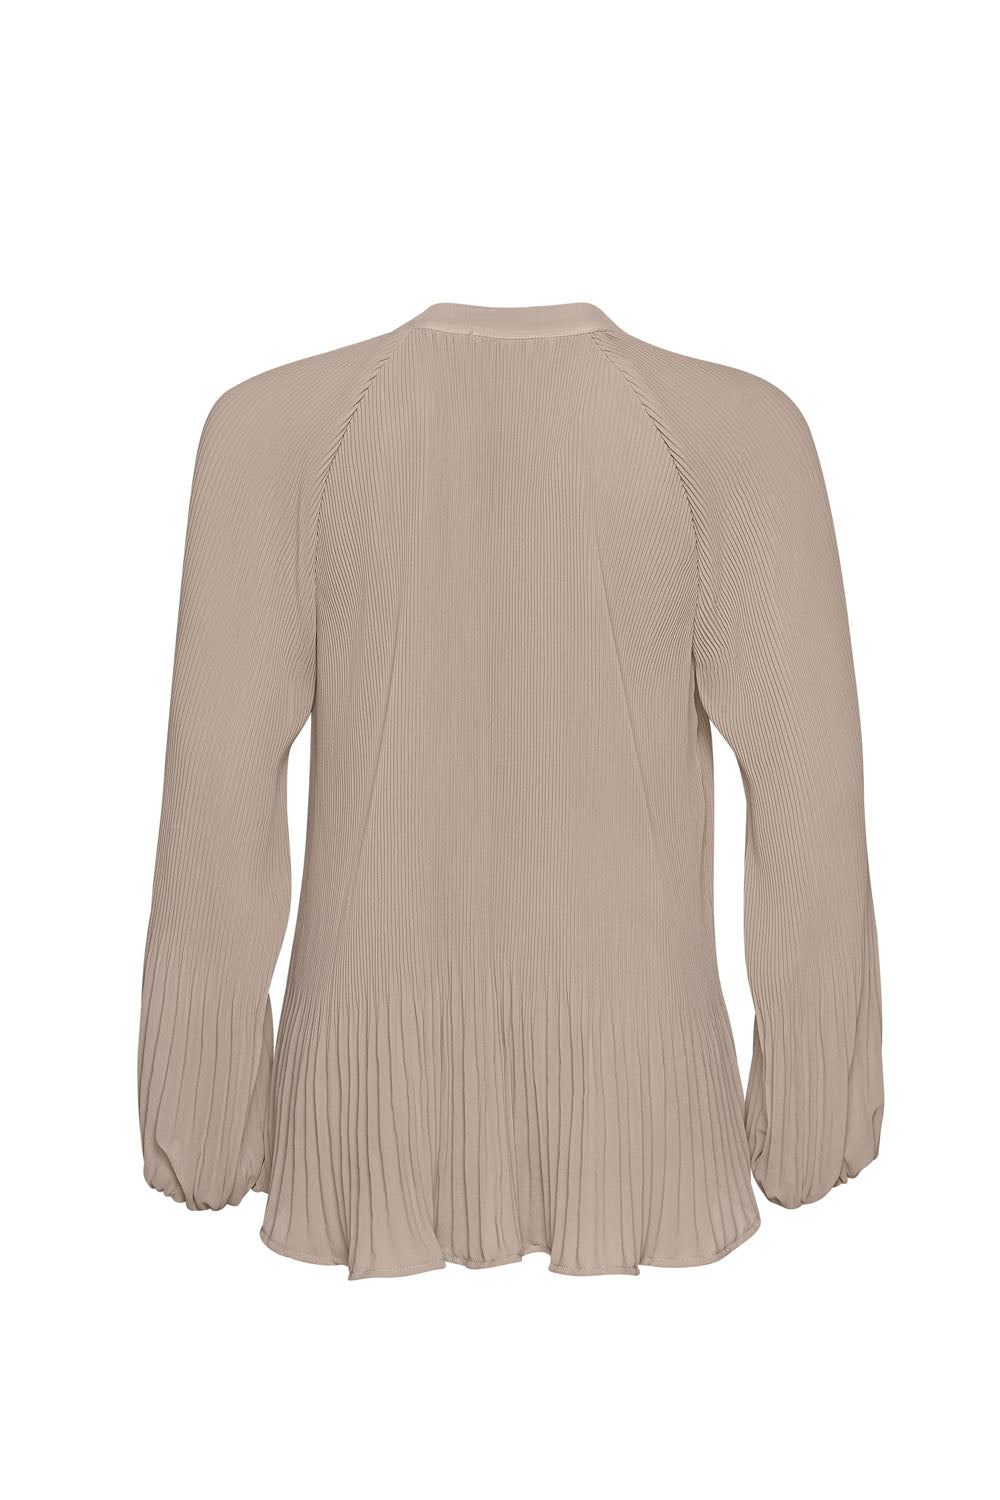 MADLY SWEETLY JUST PLEAT IT TOP - TAUPE - THE VOGUE STORE